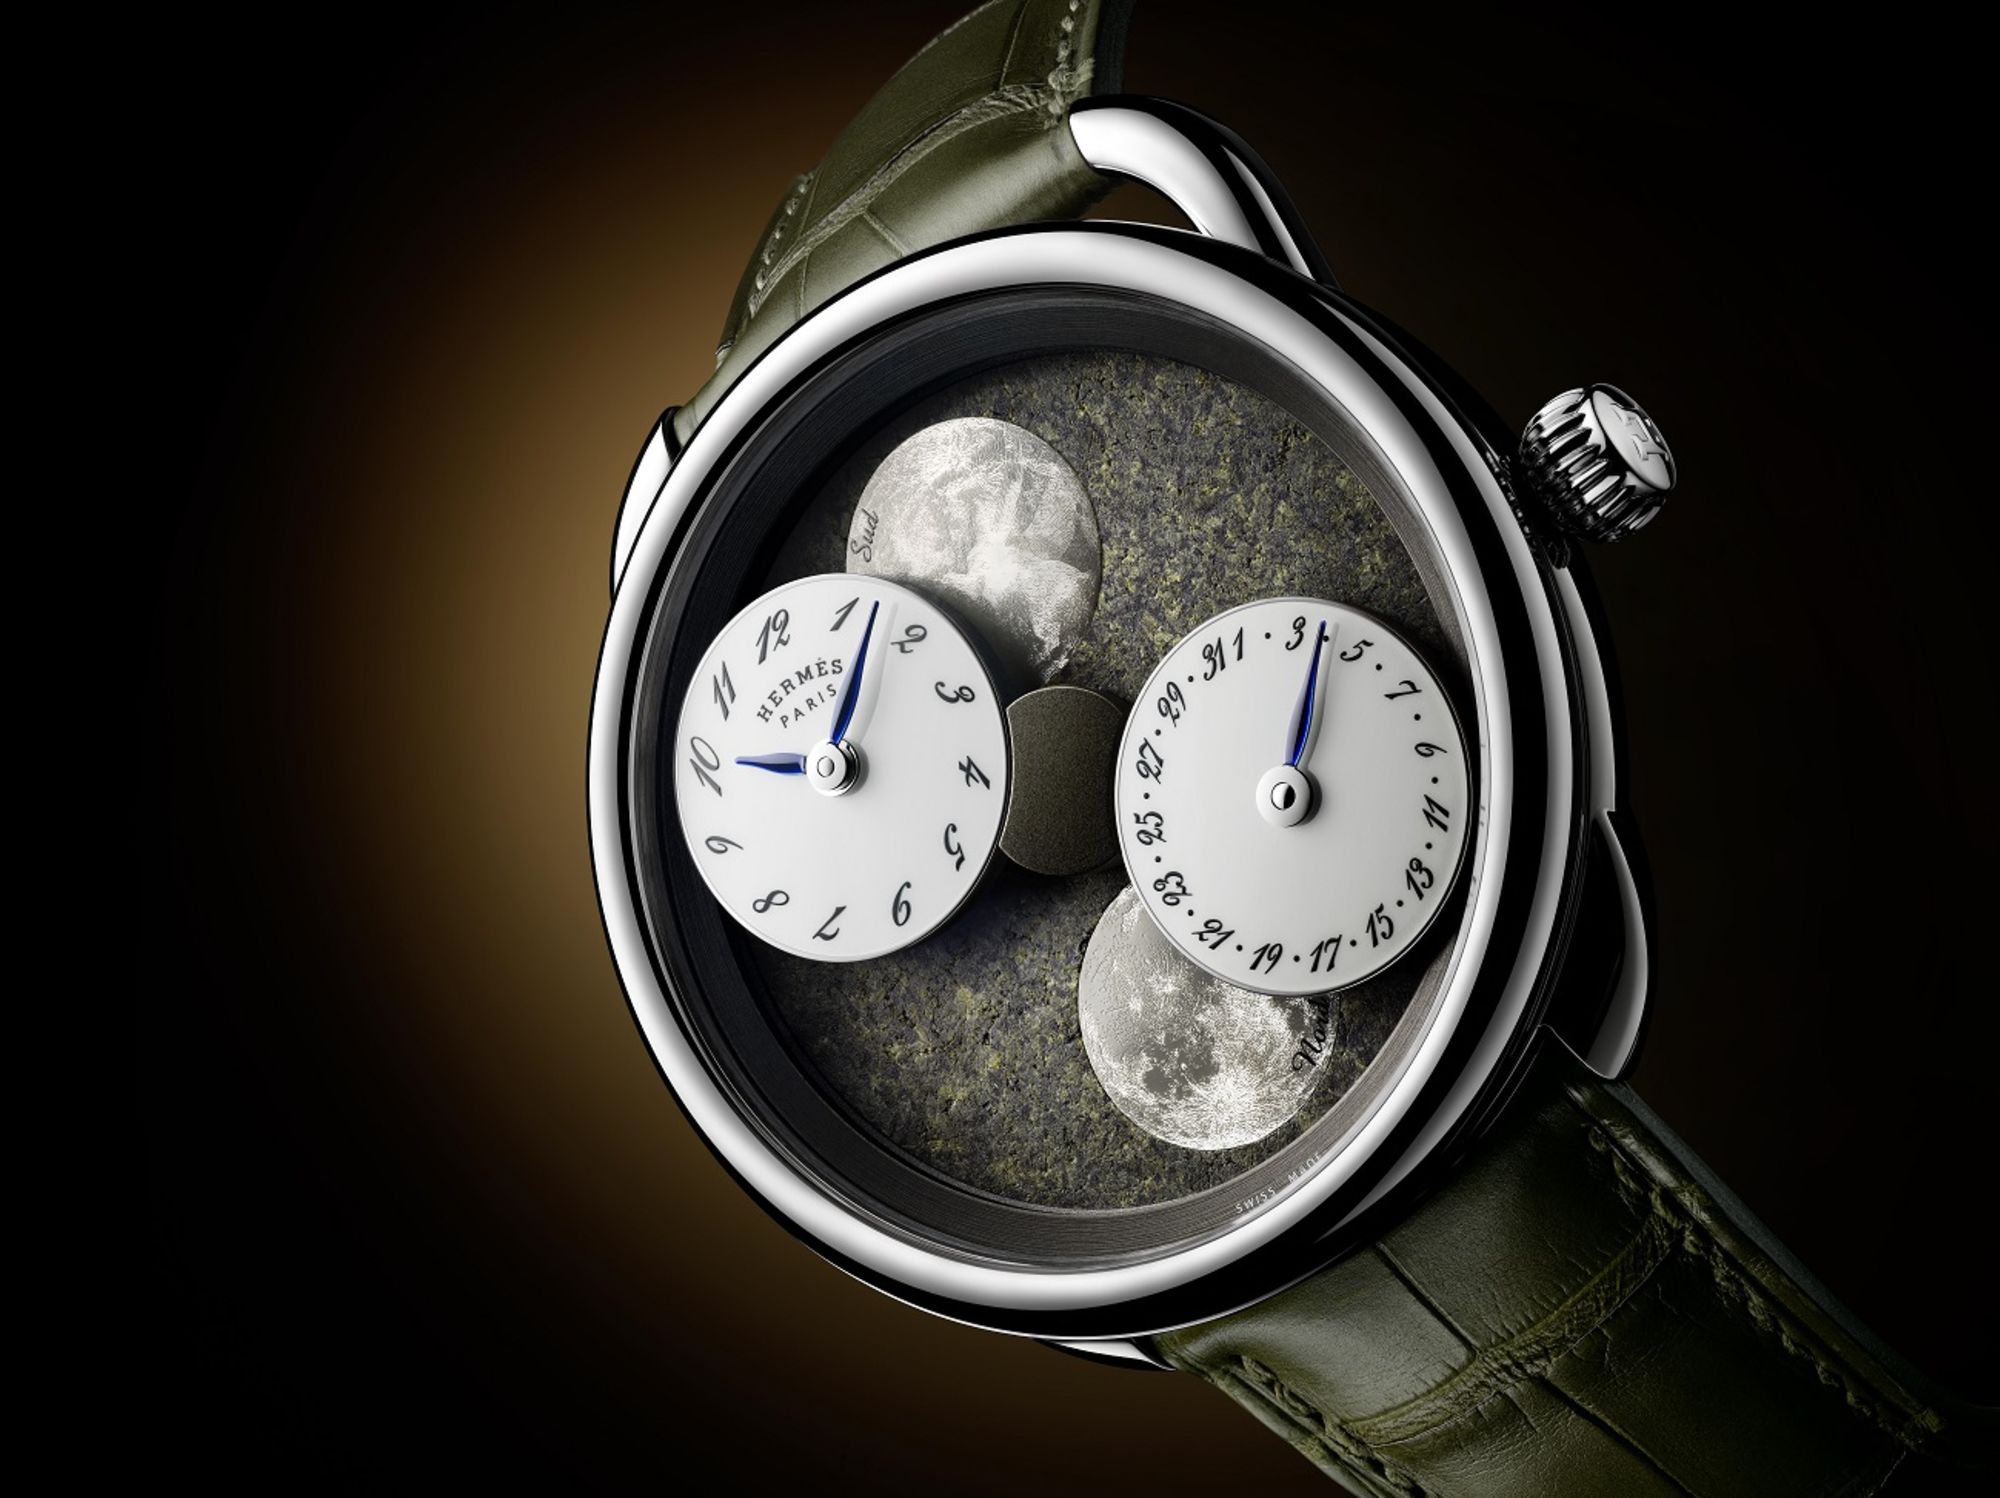 Richemont: Shifting Strategies In Watches To Better Compete, But